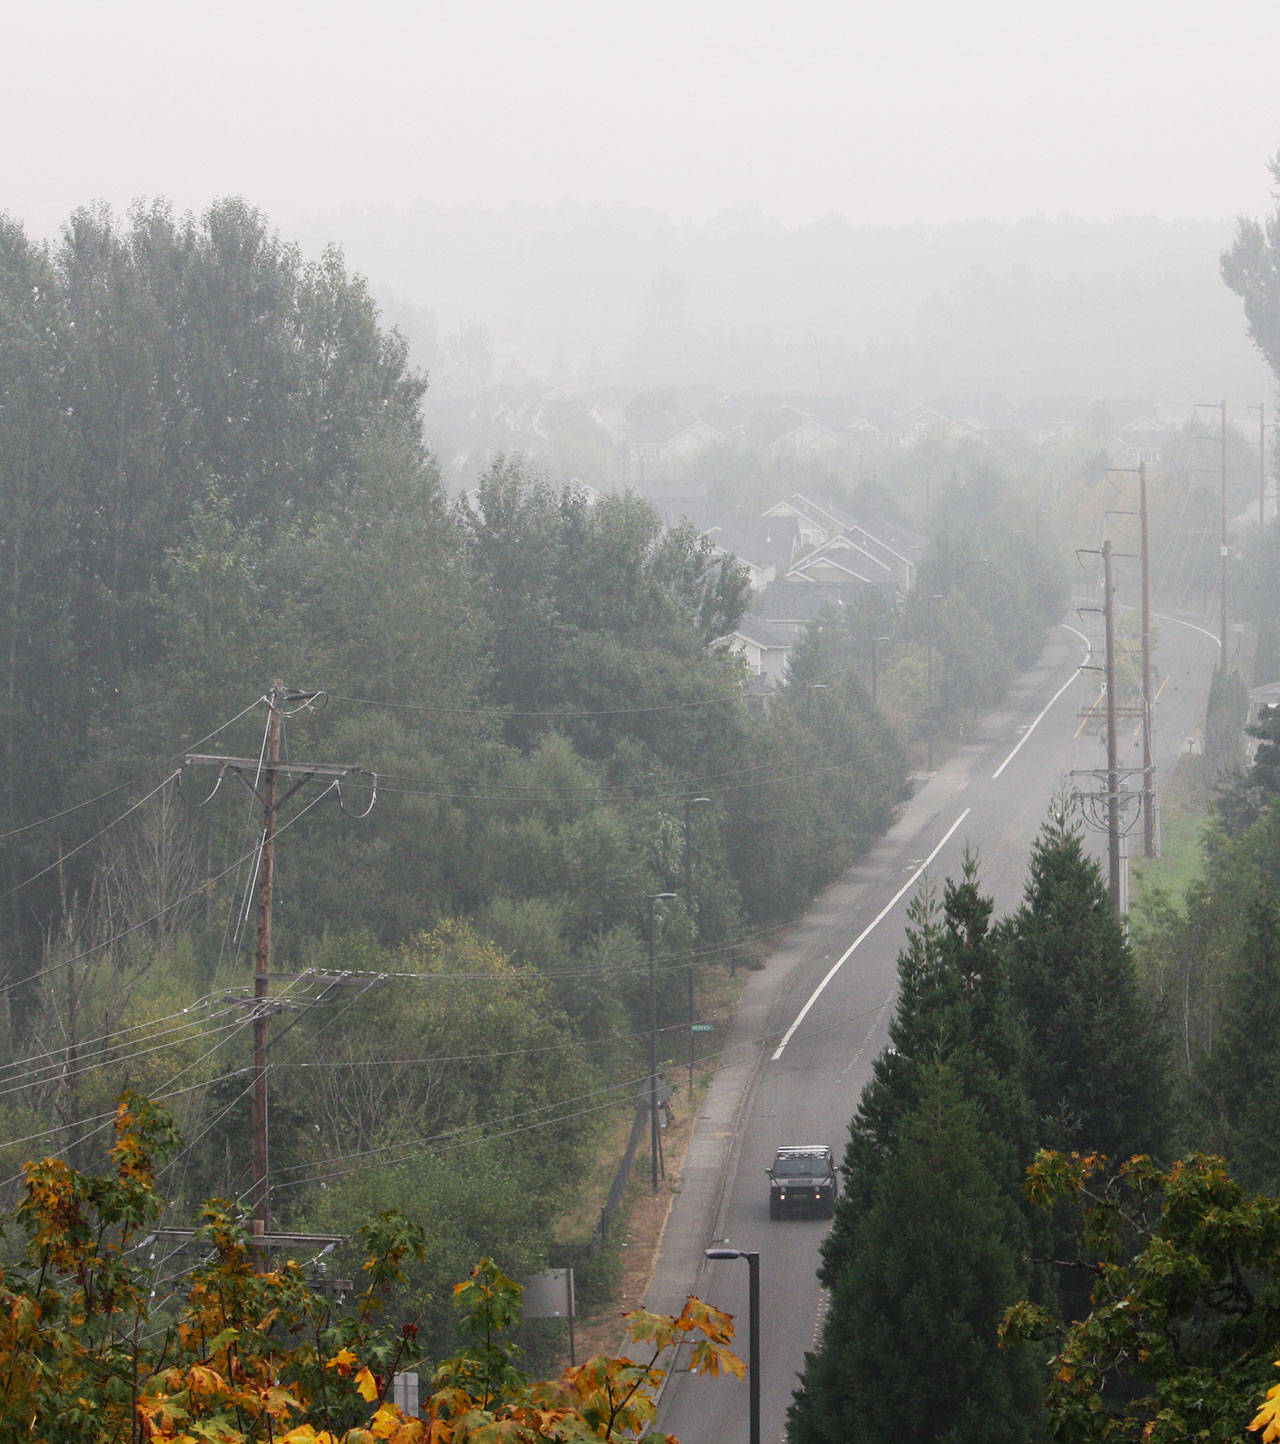 Smoke fills the Kent Valley on Monday, Sept. 14 looking east toward South 216th Street from the Robert Morris Earthwork public art installation on the west hill in SeaTac. STEVE HUNTER, Kent Reporter